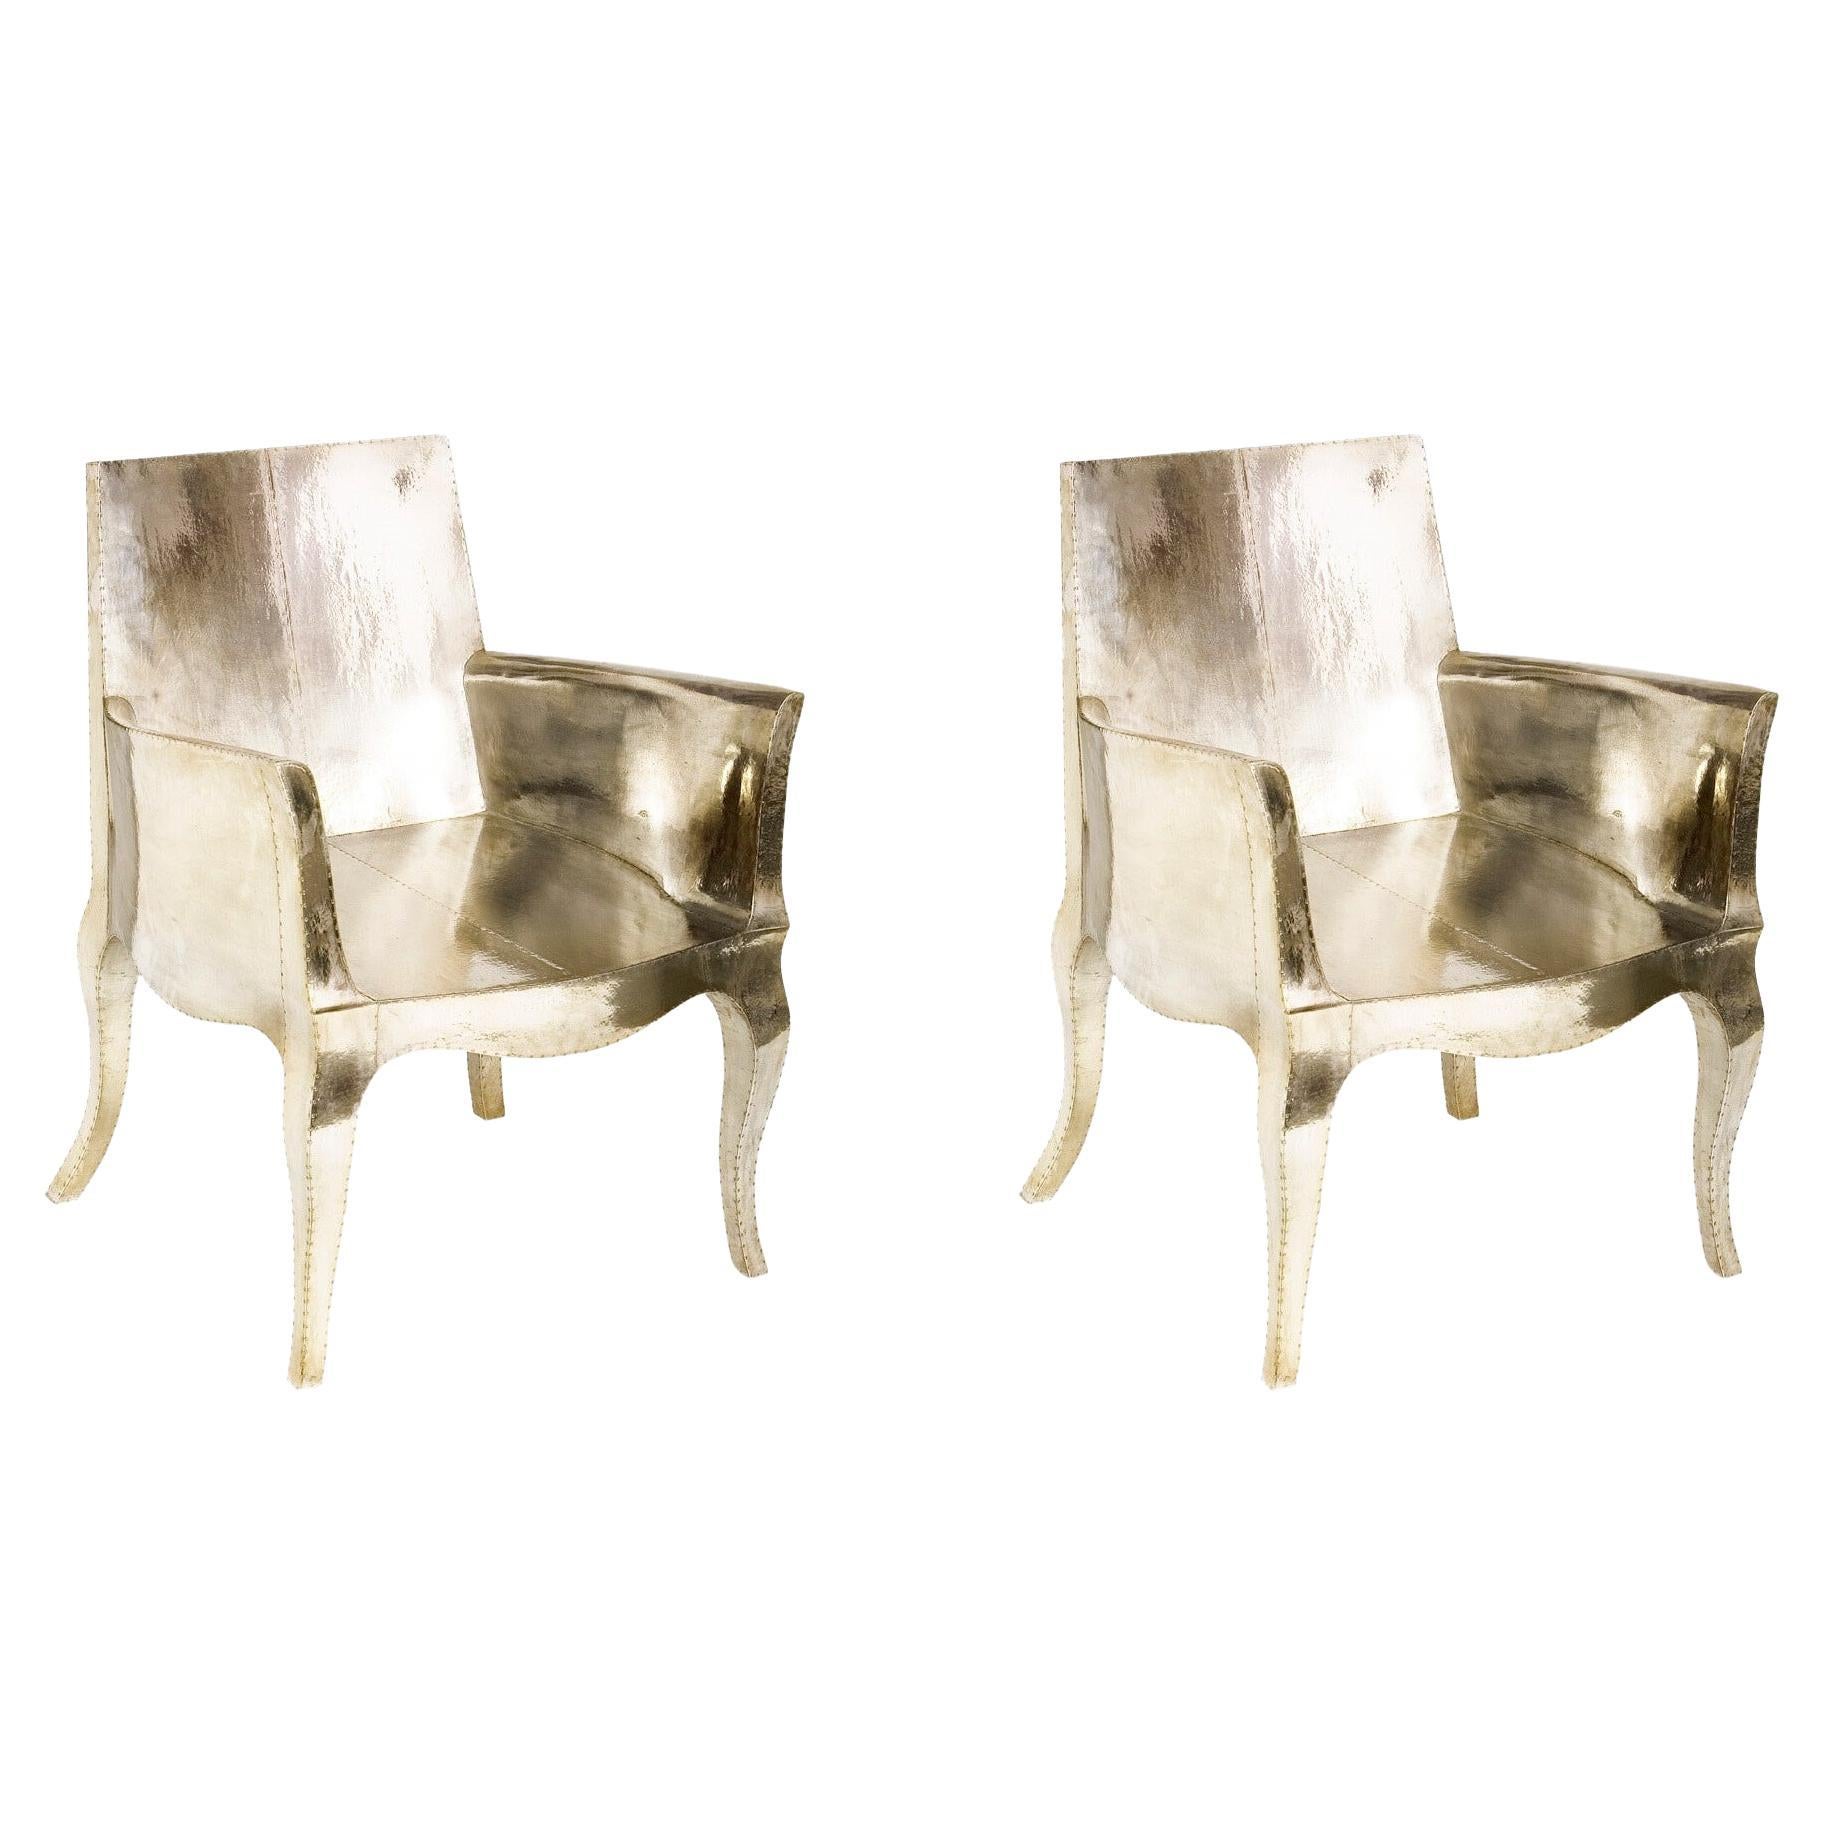 Art Deco Side Chairs Pair Designed by Paul Mathieu for Stephanie Odegard